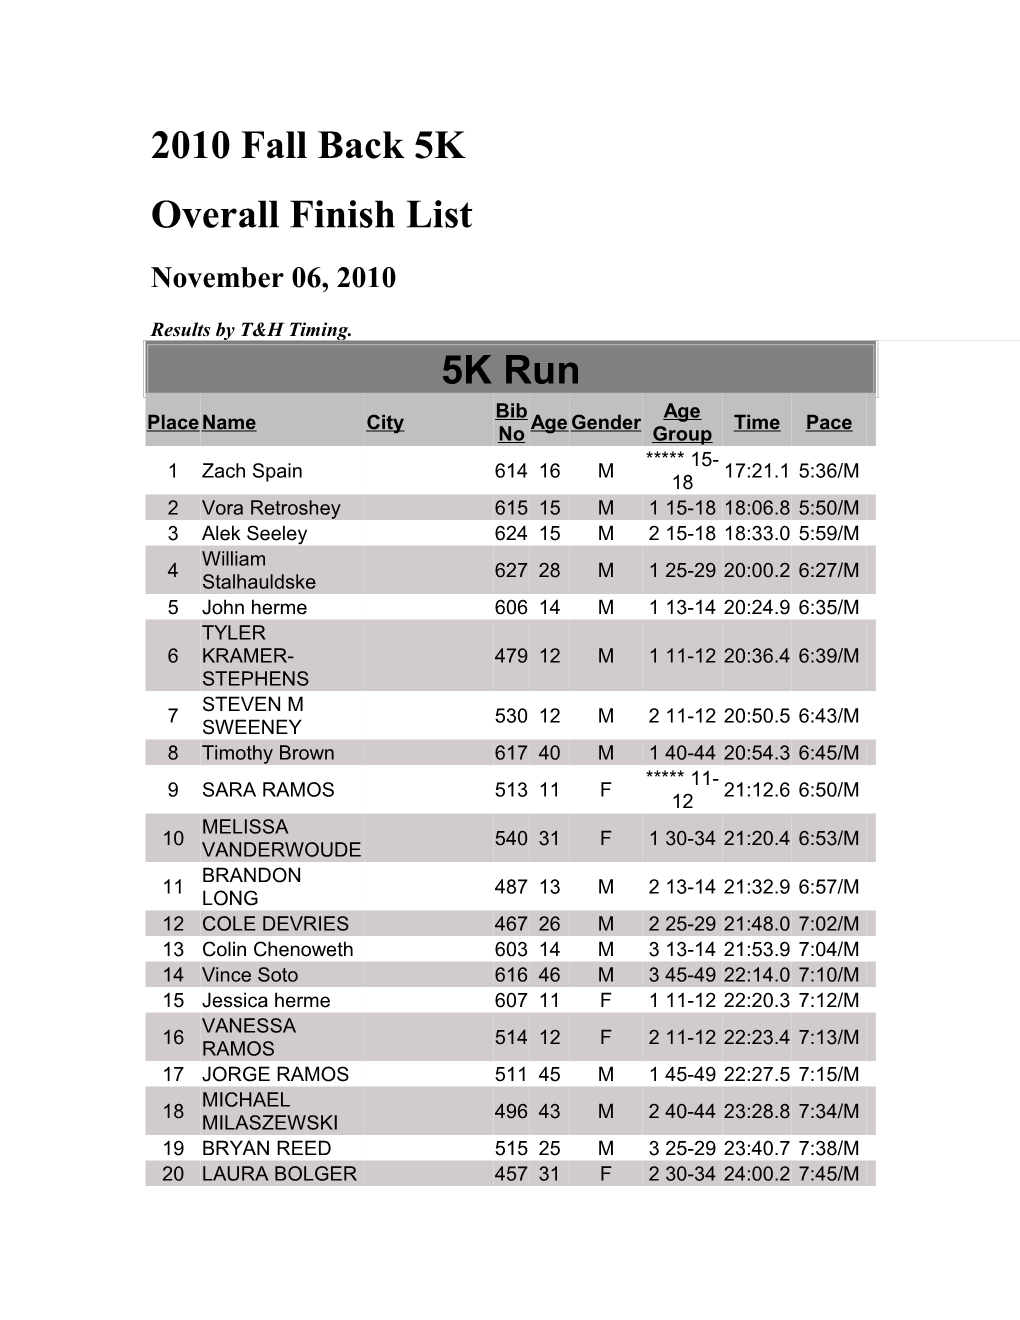 Overall Finish List s2